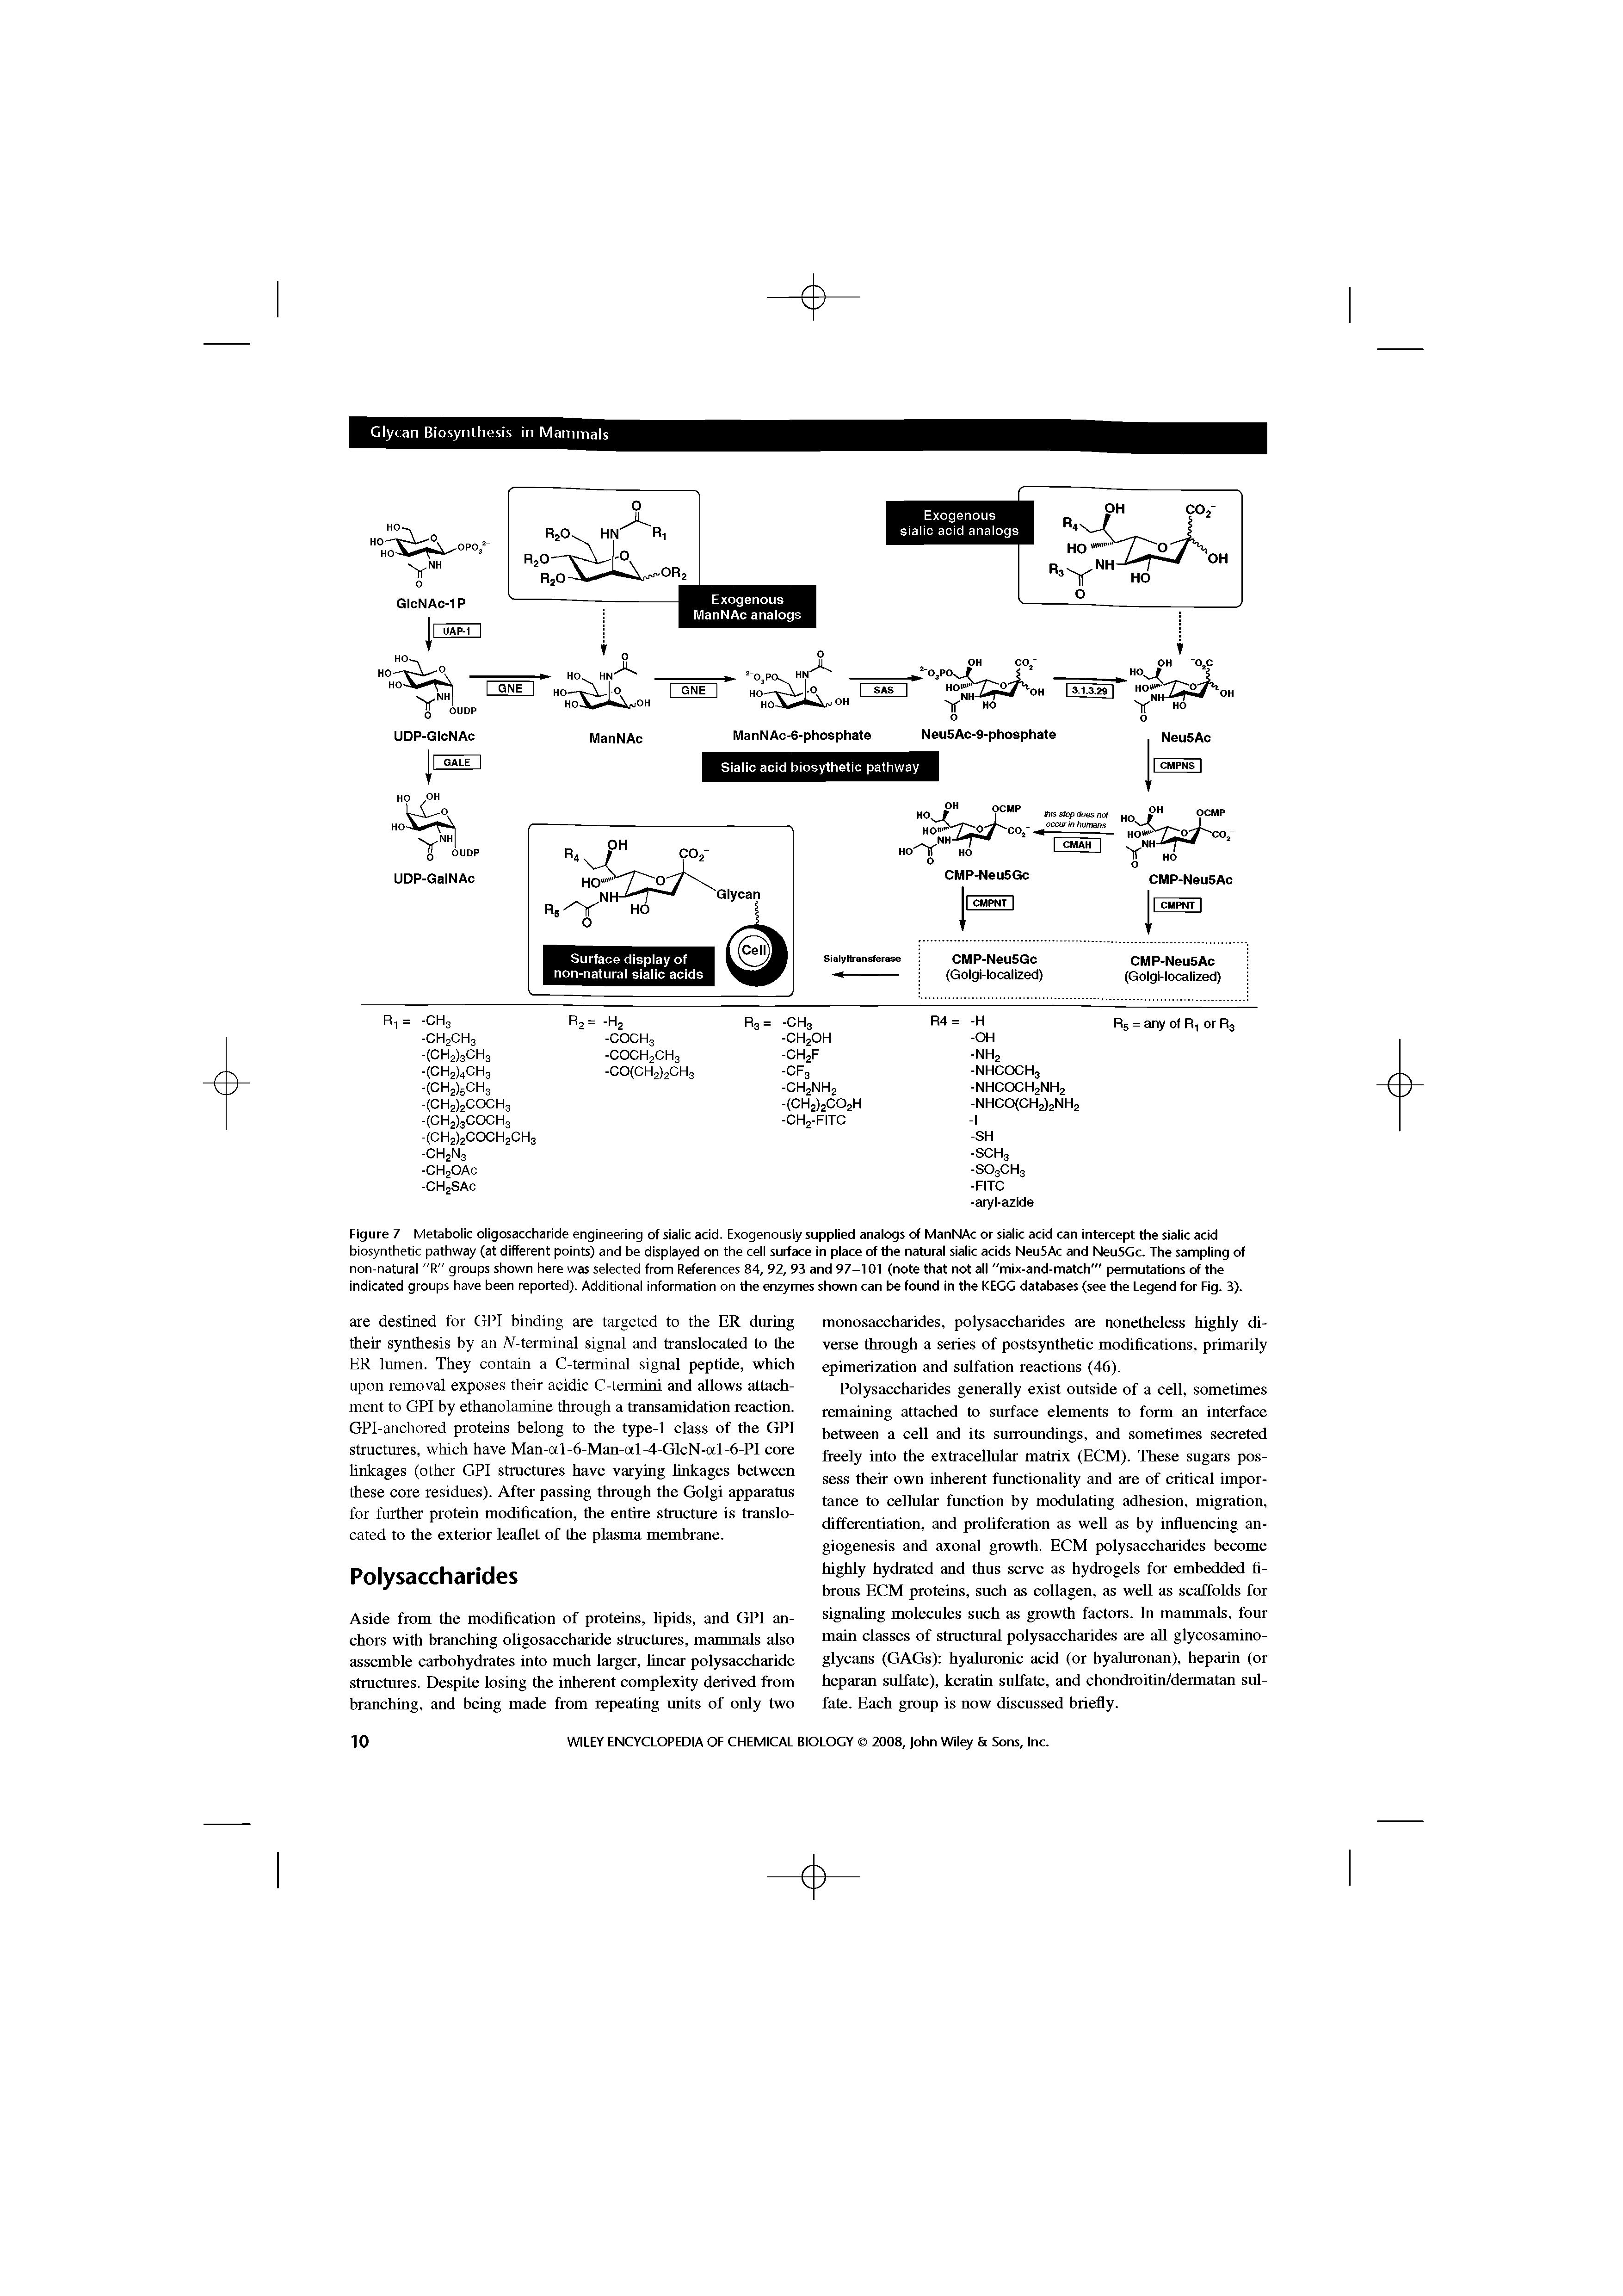 Figure 7 Metabolic oligosaccharide engineering of sialic acid. Exogenously supplied analogs of ManNAc or sialic acid can intercept the sialic acid biosynthetic pathway (at different points) and be displayed on the cell surface in place of the natural sialic acids NeuSAc and Neu5Gc. The sampling of non-natural "R" groups shown here was selected from References 84, 92, 93 and 97-101 (note that not all "mix-and-match" permutations of the indicated groups have been reported). Additional information on the enzymes shown can be found in the KEGG databases (see the Legend for Fig. 3).